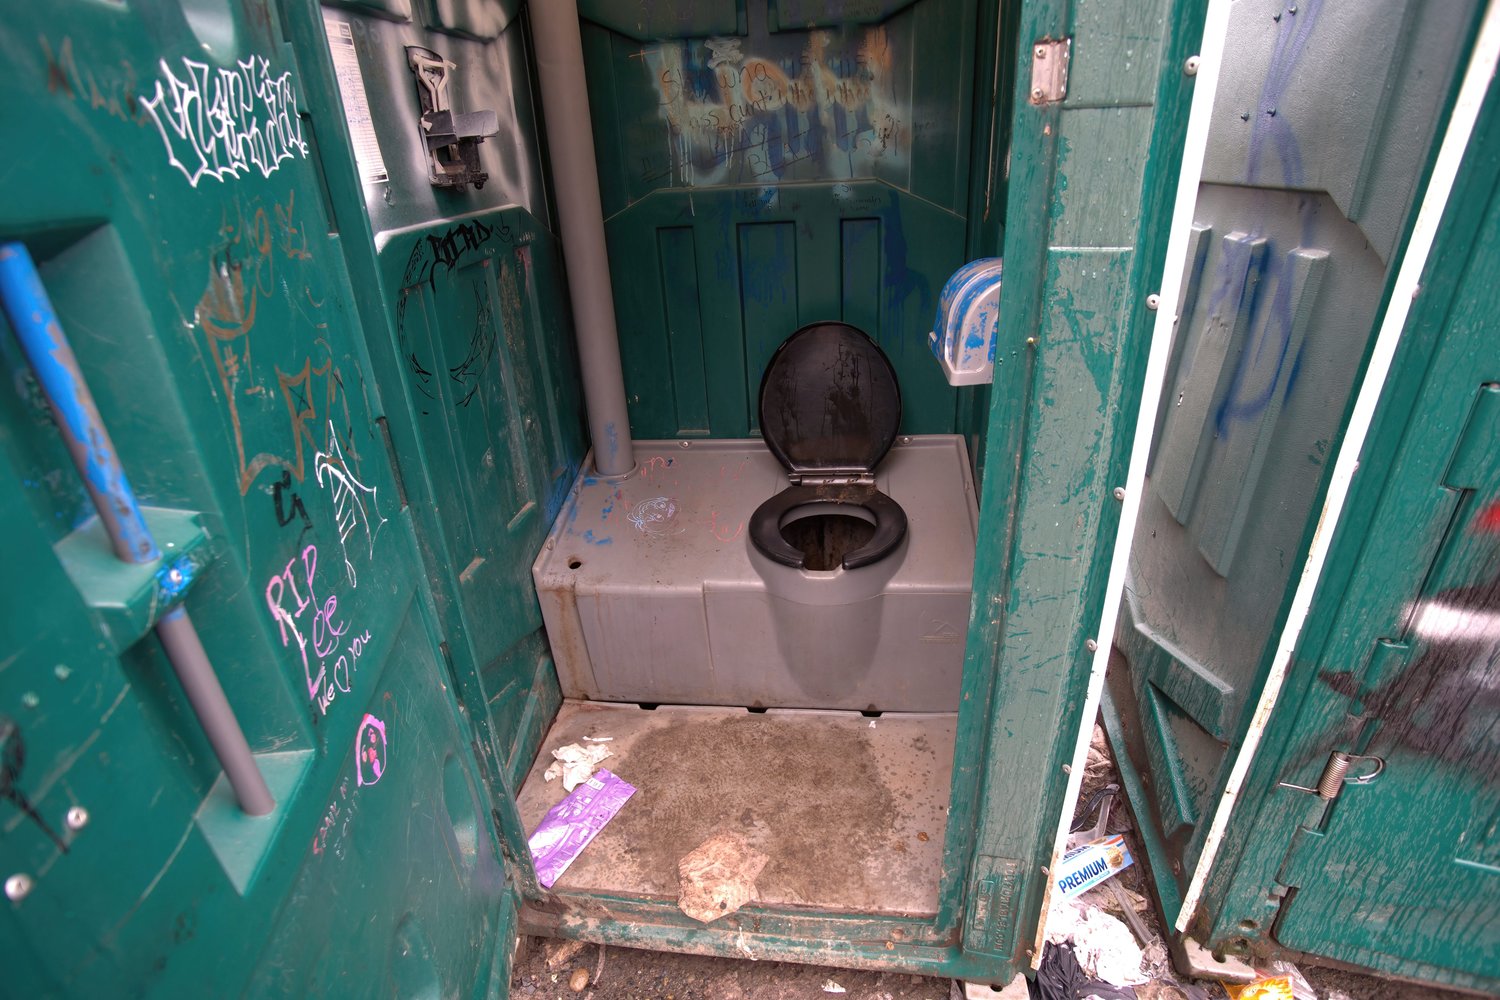 This is an unserviced port-a-potty in The Jungle.